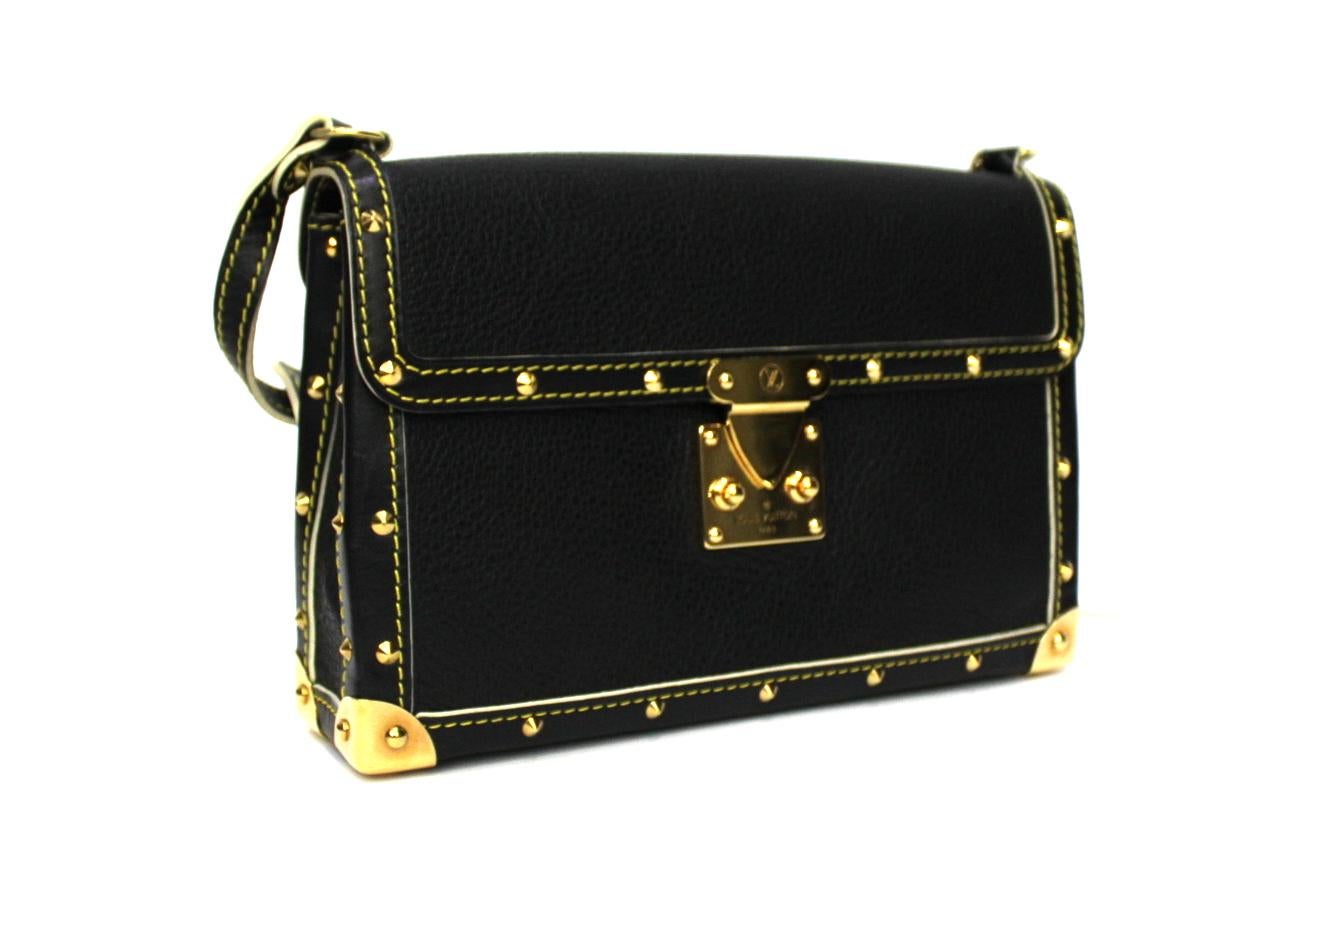 Louis Vuitton Suali shoulder clutch bag made of black leather with golden hardware.

Equipped with top handle to wear it on the shoulder. Hook closure, internally quite large.

The bag is in excellent condition.